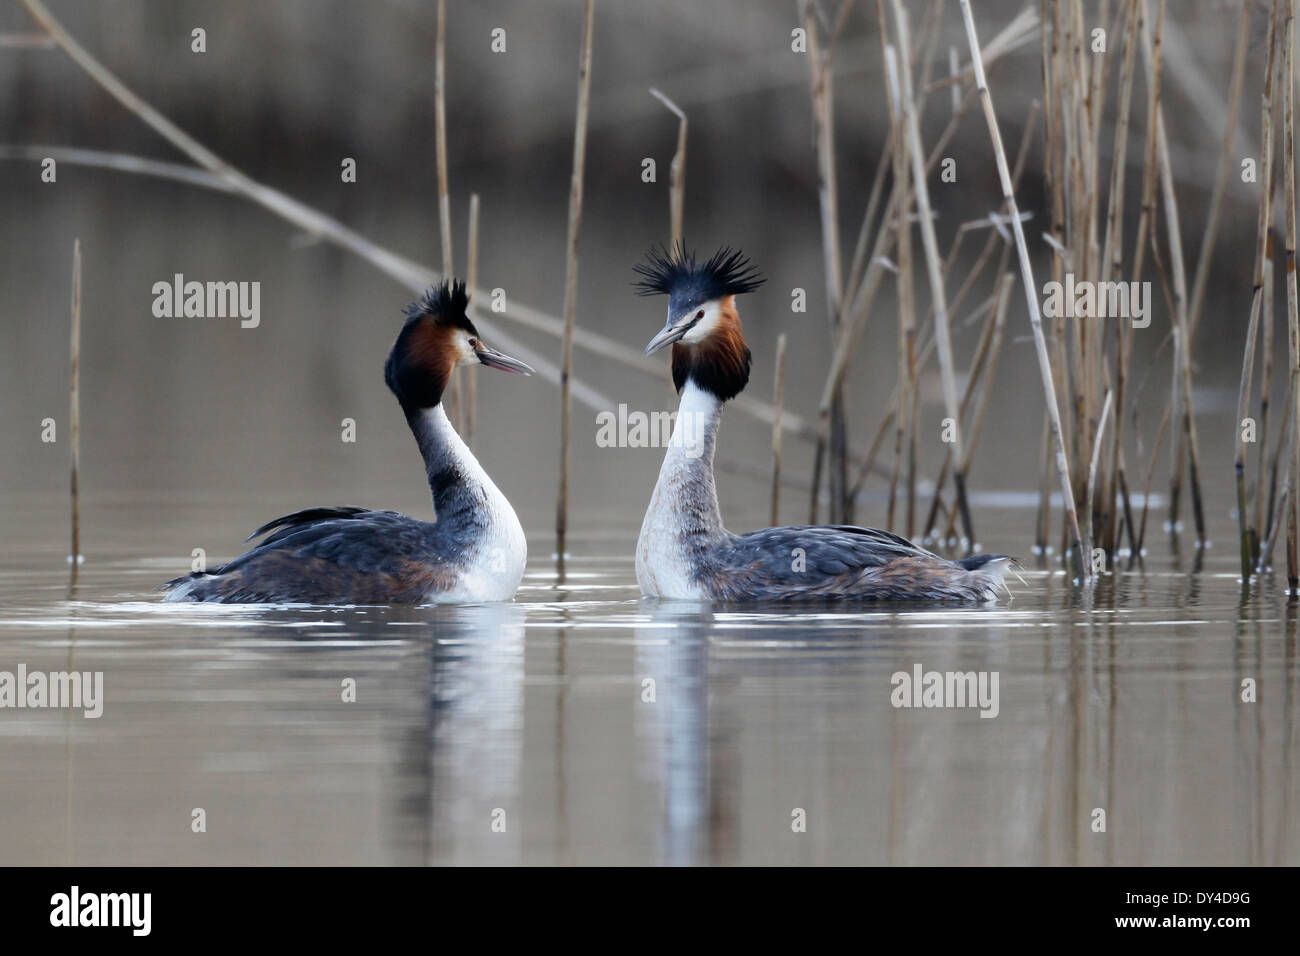 Great-crested grebe, Podiceps cristatus, two birds on water, Shropshire, March 2014 Stock Photo